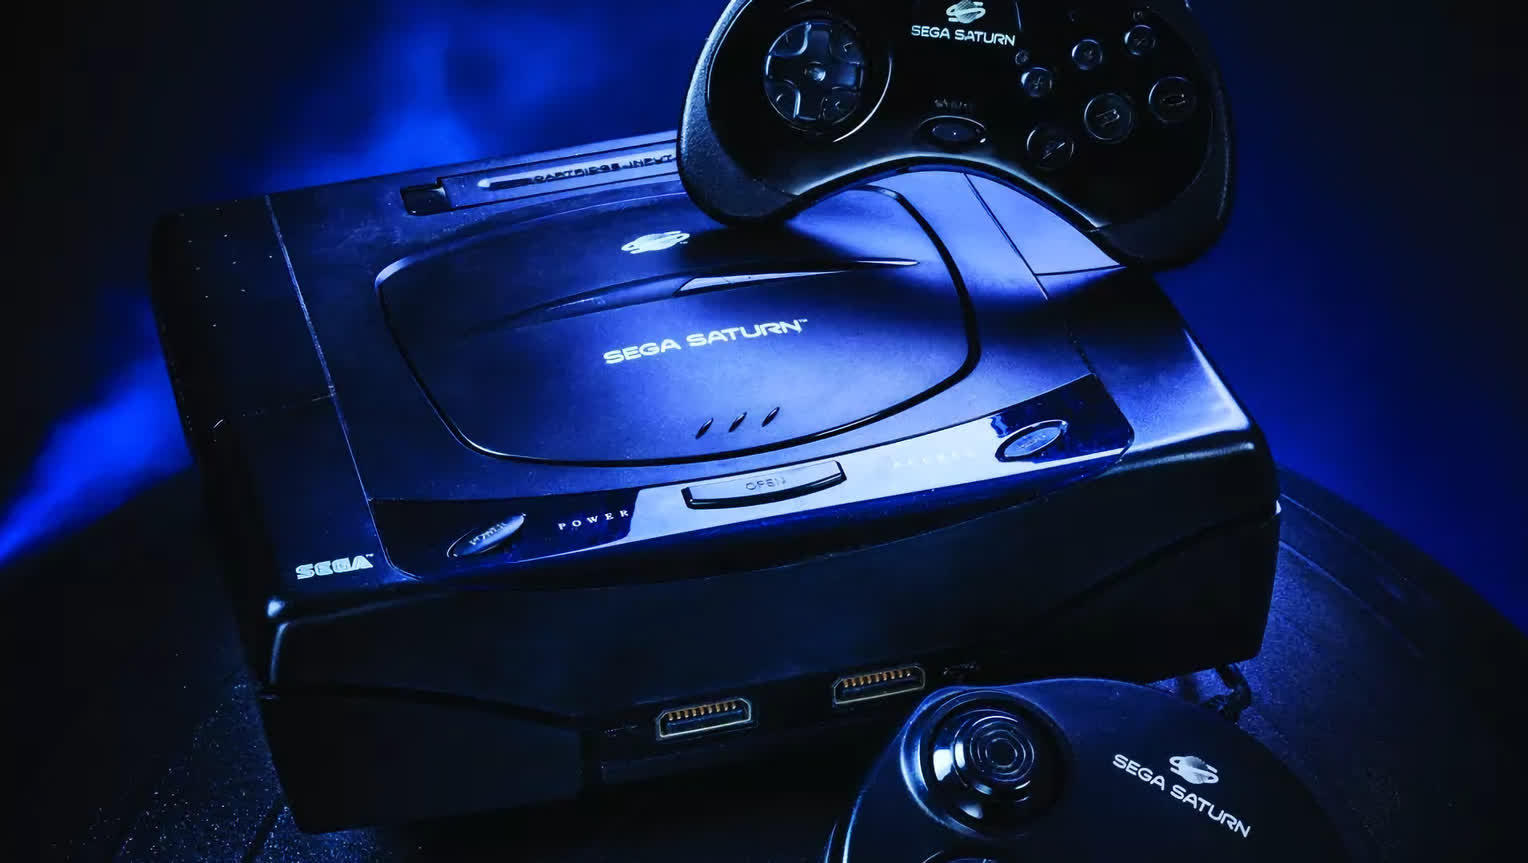 Sega considered making a Saturn and Dreamcast mini, but component constraints made it too expensive